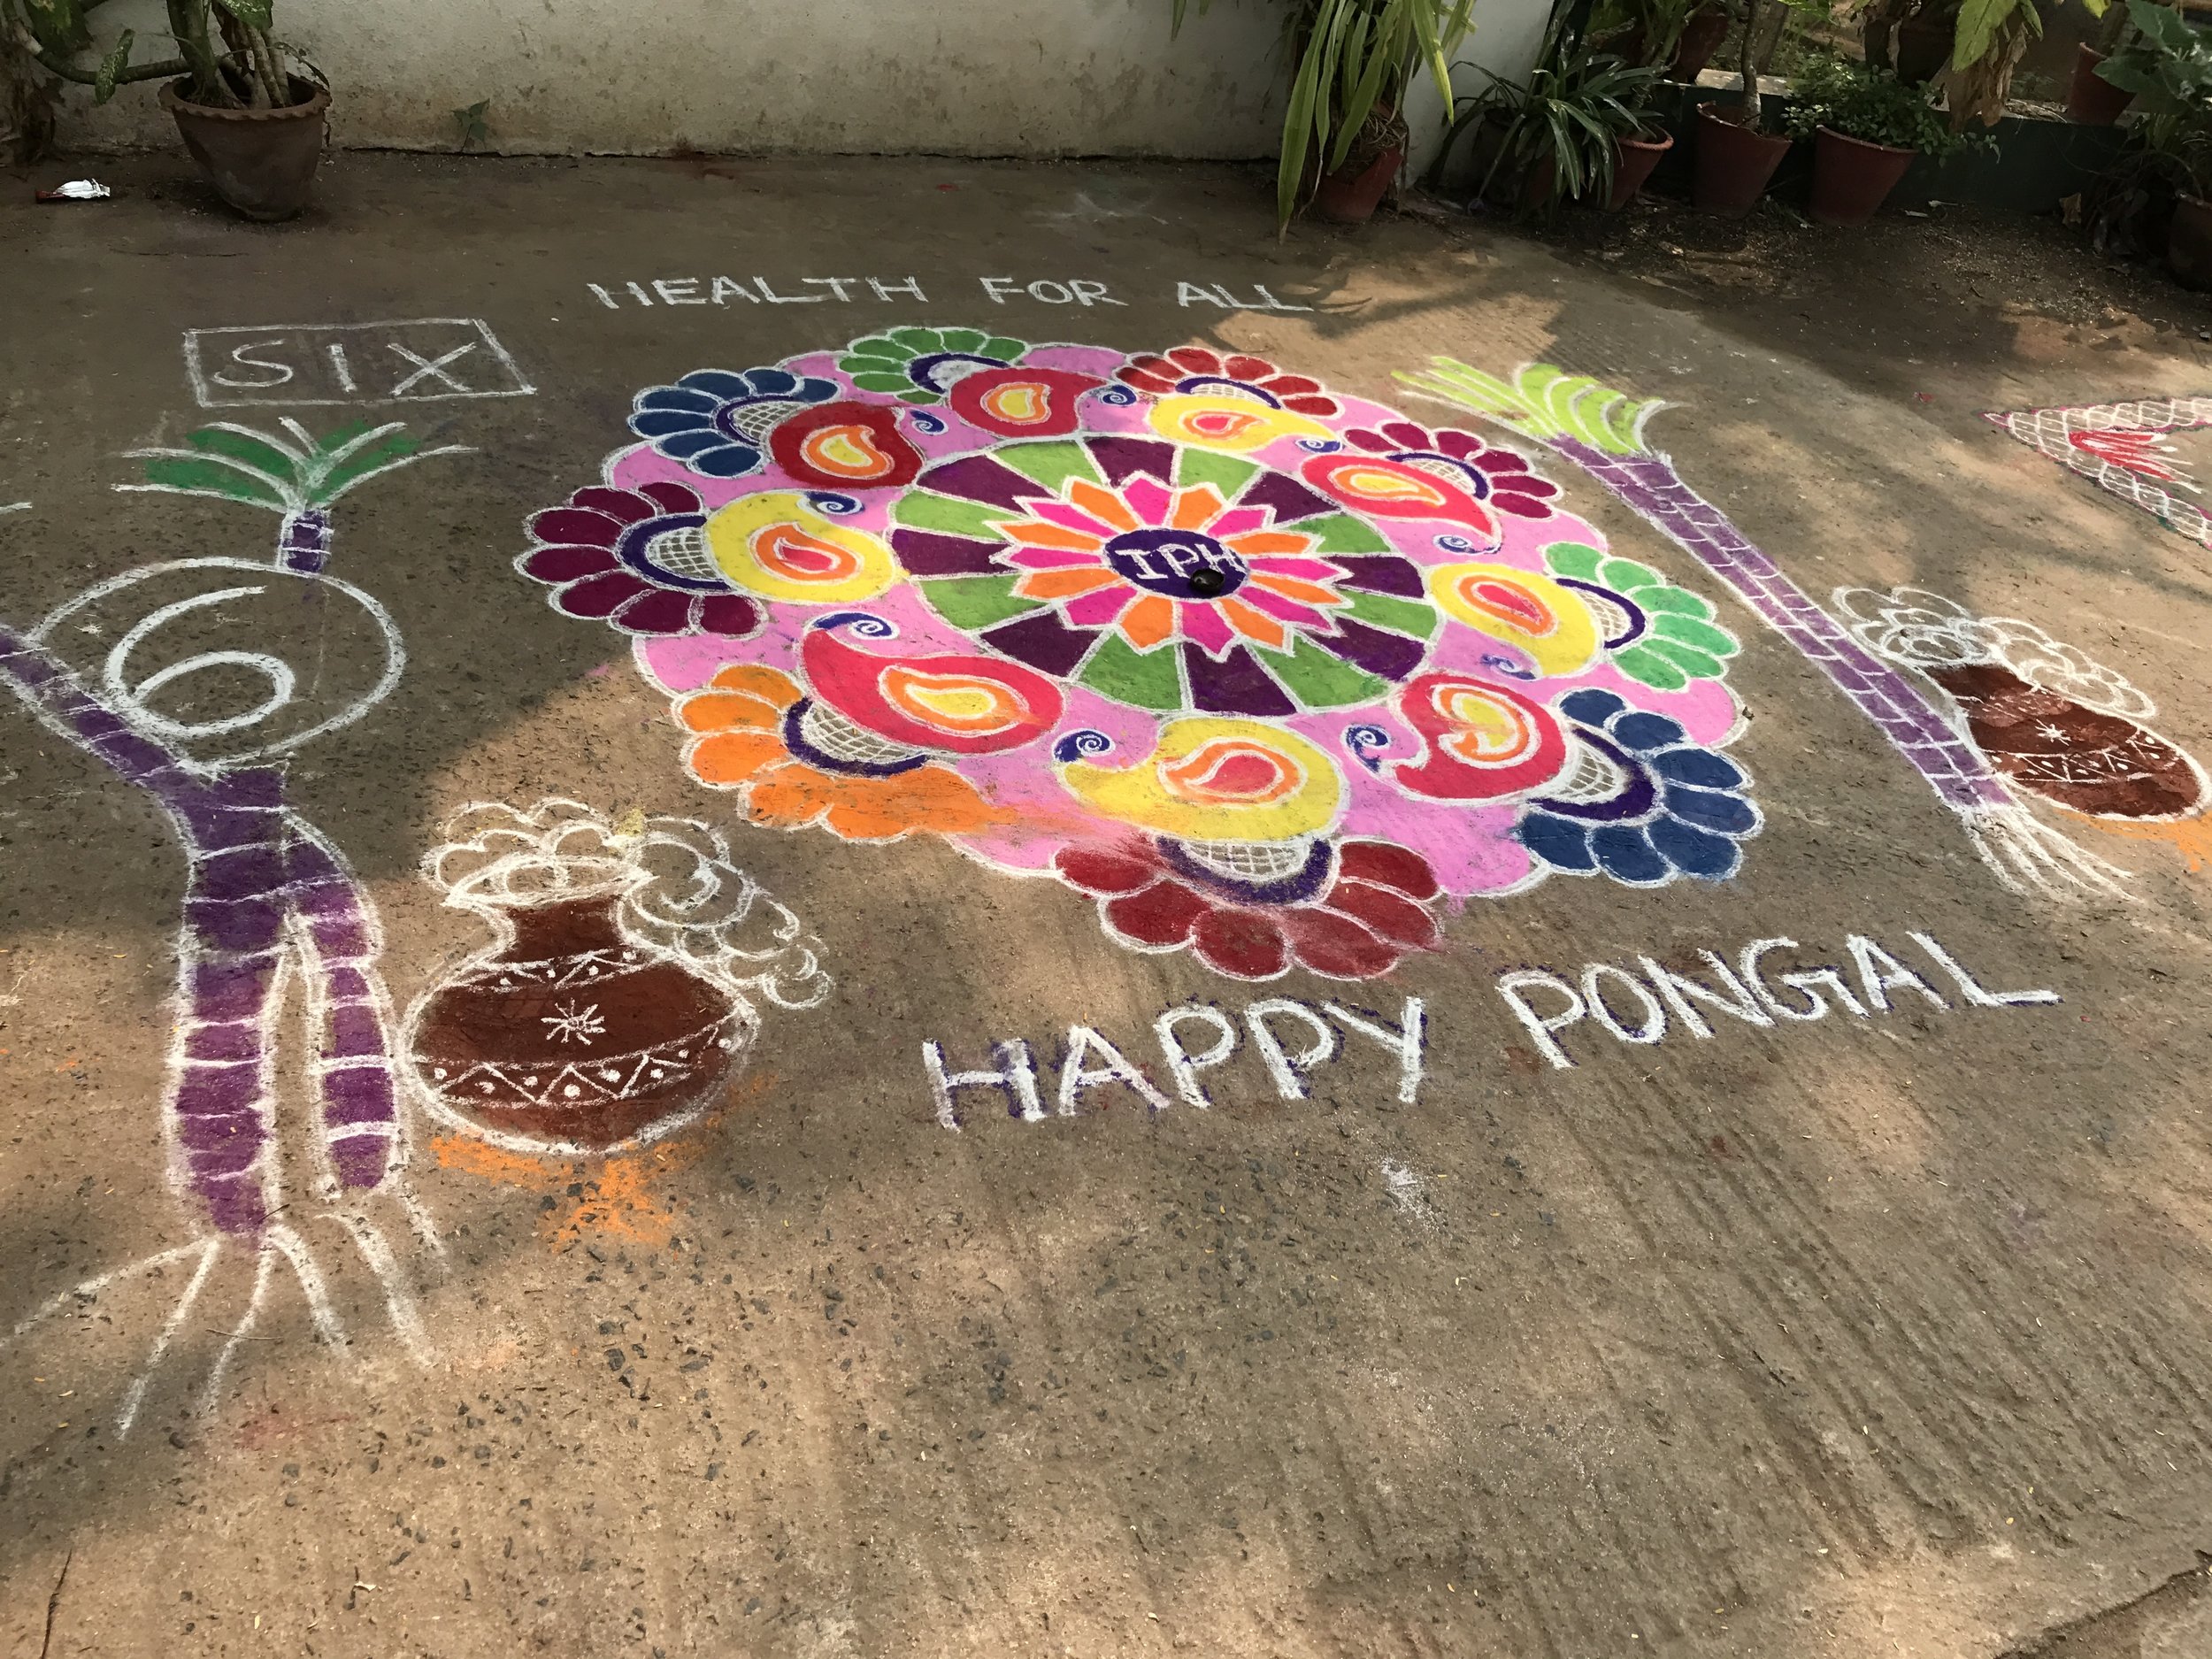  The day's activities included a  kolam  drawing competition between groups of nurses and staff members at the IPH. The designs are a Pongal tradition made mostly of colored chalk that often include flowers, candles, and other decorations.&nbsp; 